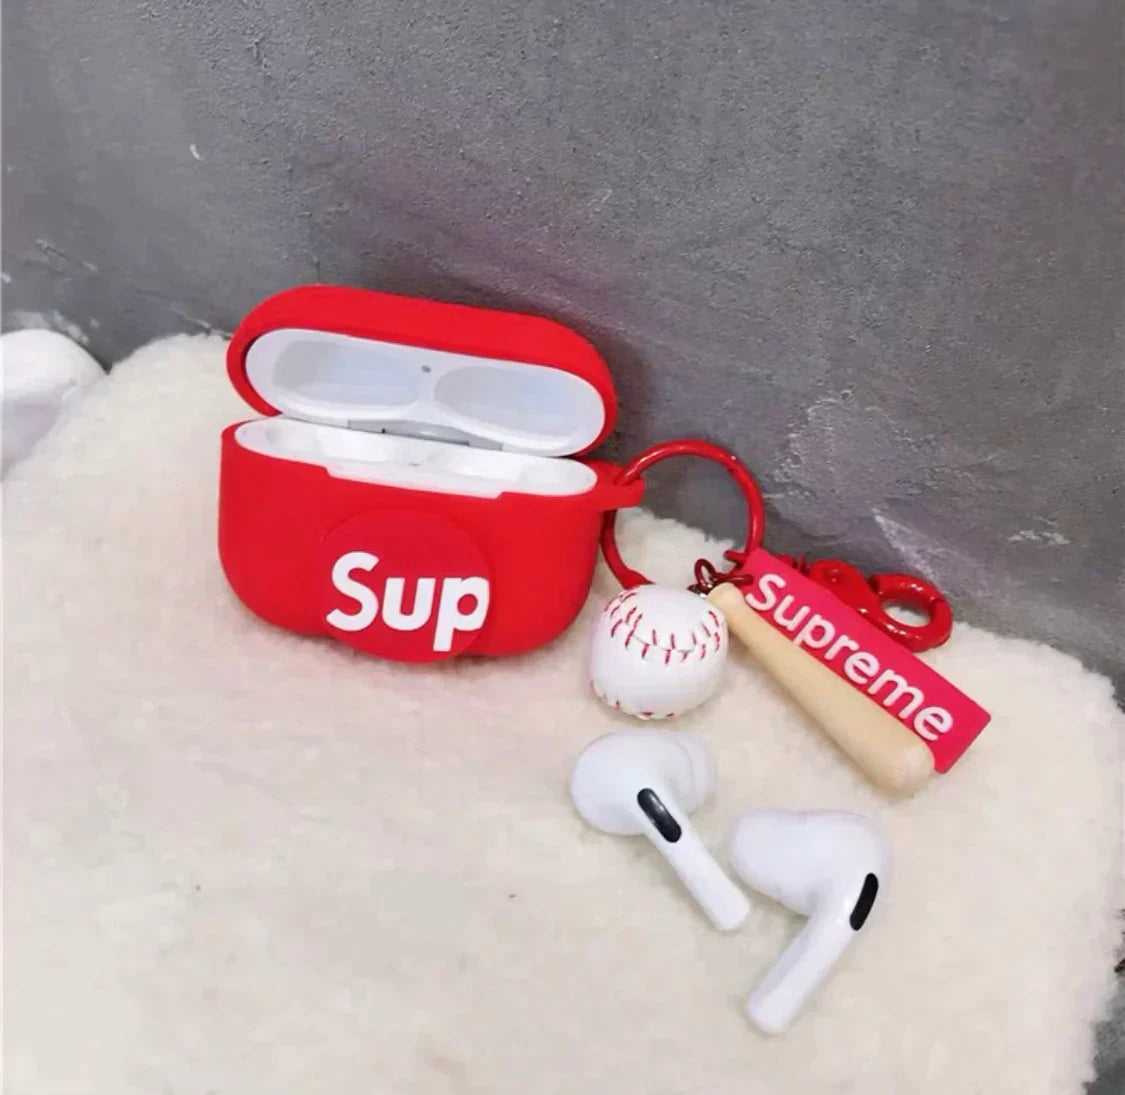 Sup AirPods Cases - Glamour Gaurd